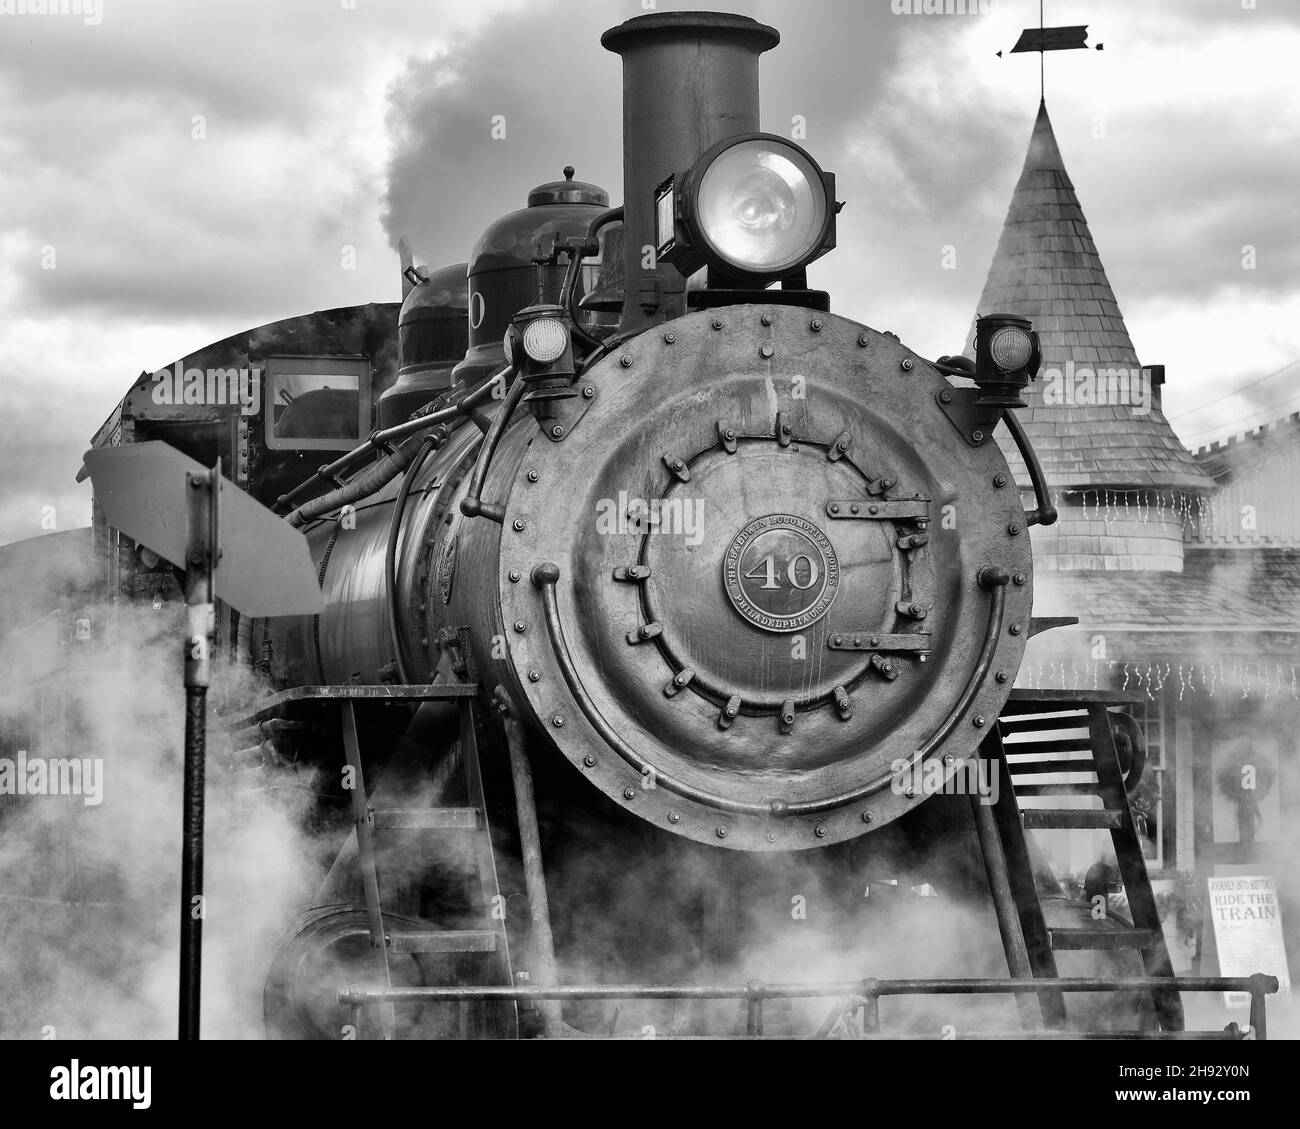 NEW HOPE, UNITED STATES - Sep 01, 2017: A grayscale shot of an old Locomotive and steam coming out of it. Stock Photo